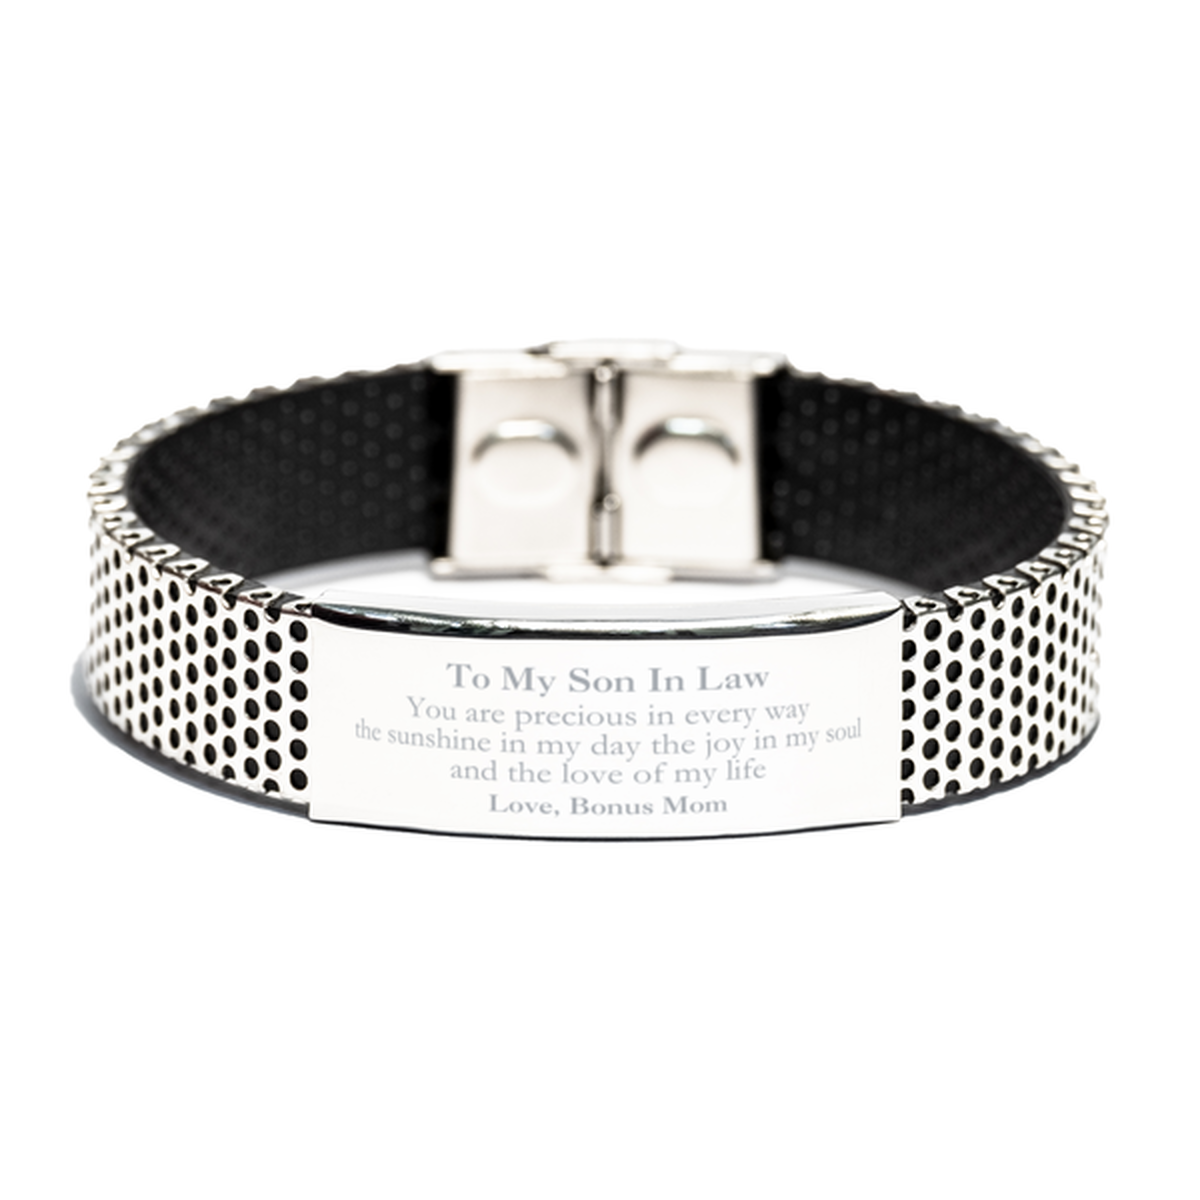 Graduation Gifts for Son In Law Stainless Steel Bracelet Present from Bonus Mom, Christmas Son In Law Birthday Gifts Son In Law You are precious in every way the sunshine in my day. Love, Bonus Mom